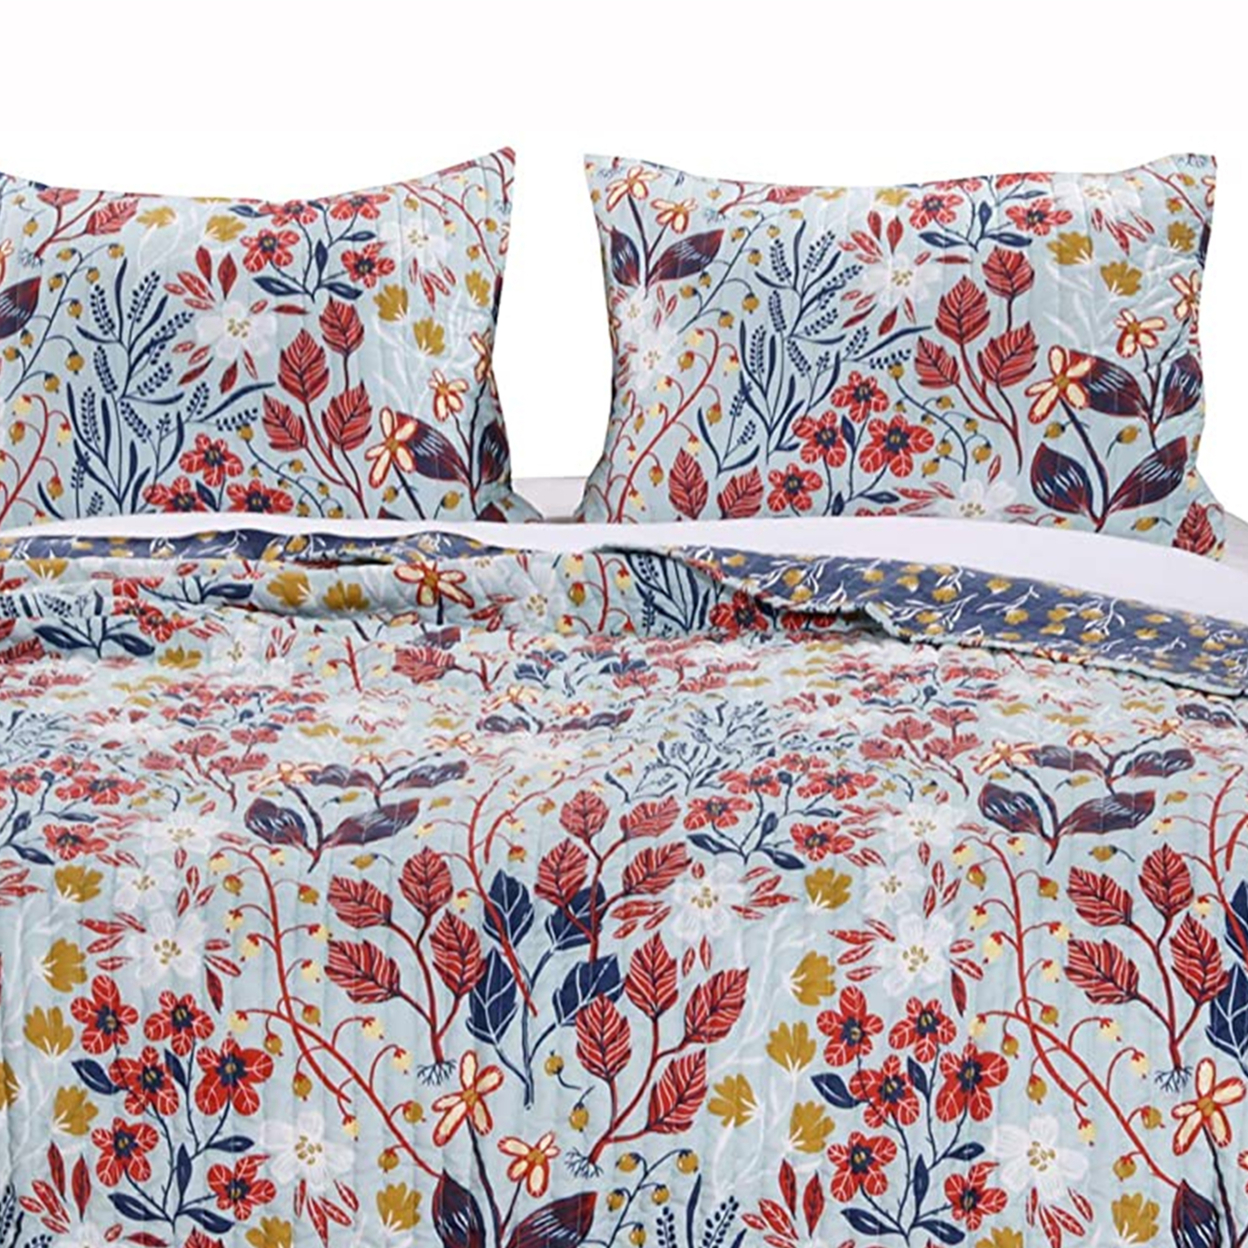 Twin Size 2 Piece Polyester Quilt Set With Floral Prints, Multicolor- Saltoro Sherpi